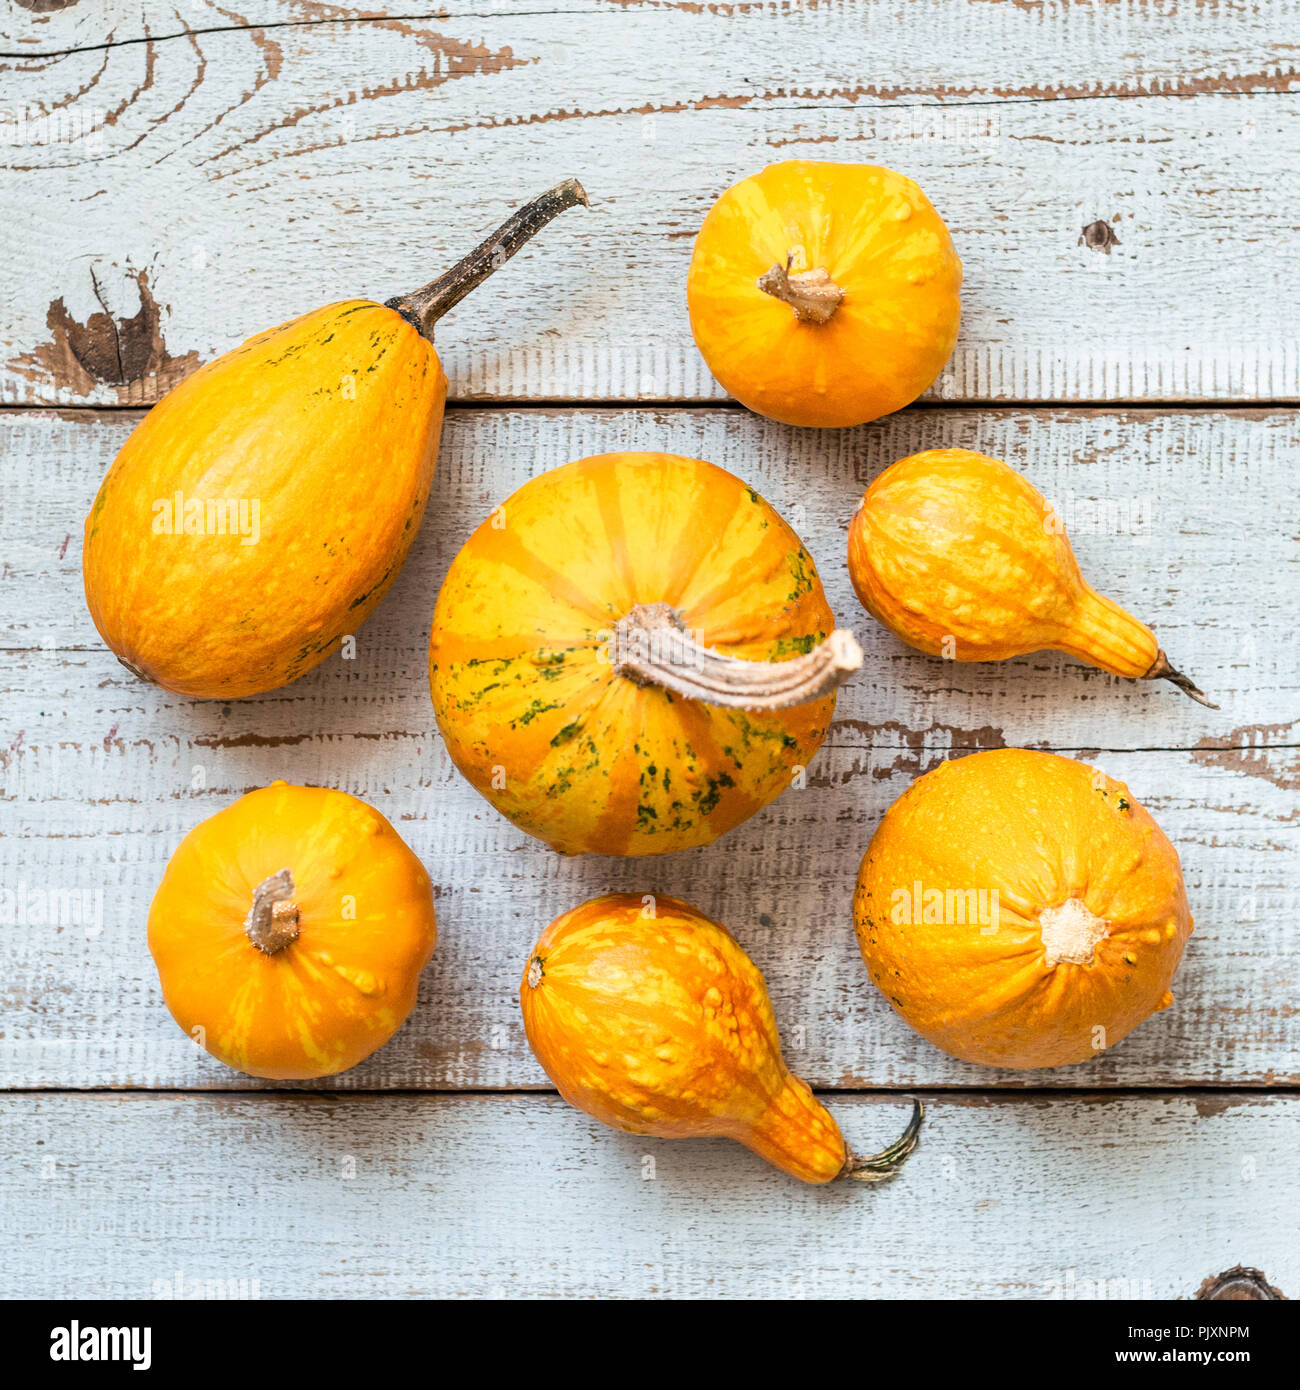 Happy Thanksgiving Background. Selection of various pumpkins on white wooden background. Autumn vegetables and seasonal decorations. Autumn Harvest an Stock Photo